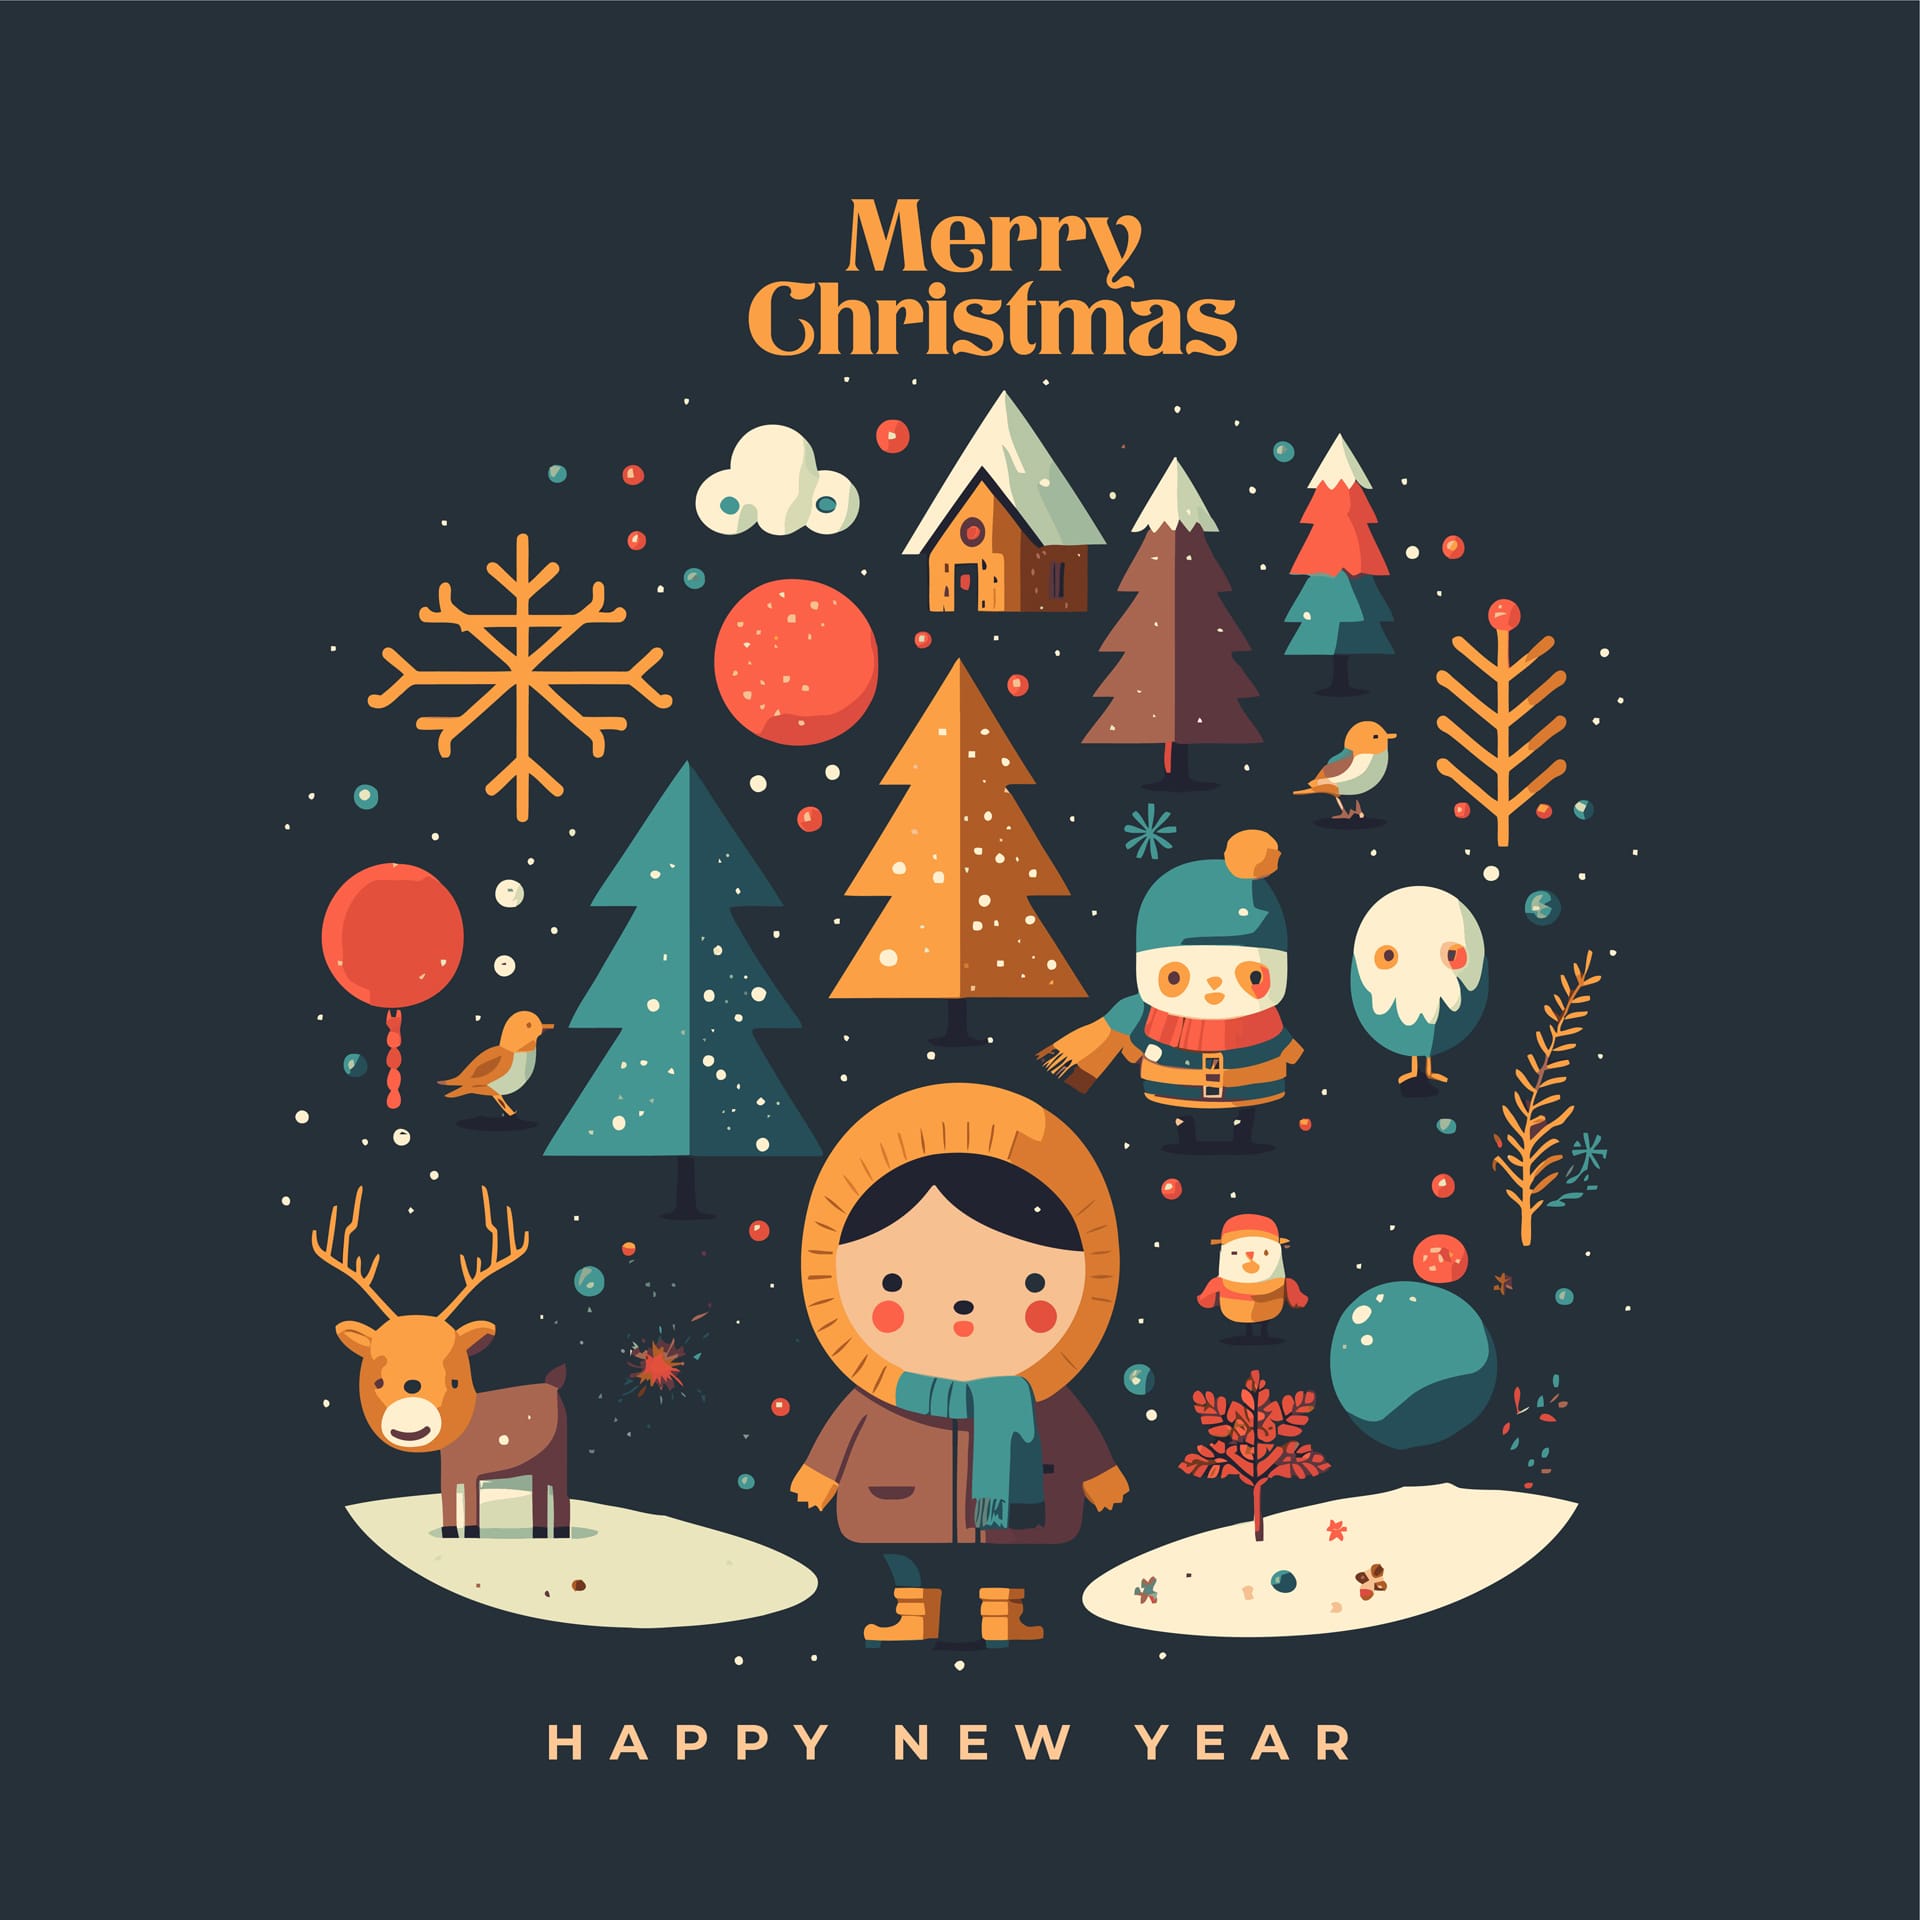 Christmas happy new year greetings card invitation banner flat picture